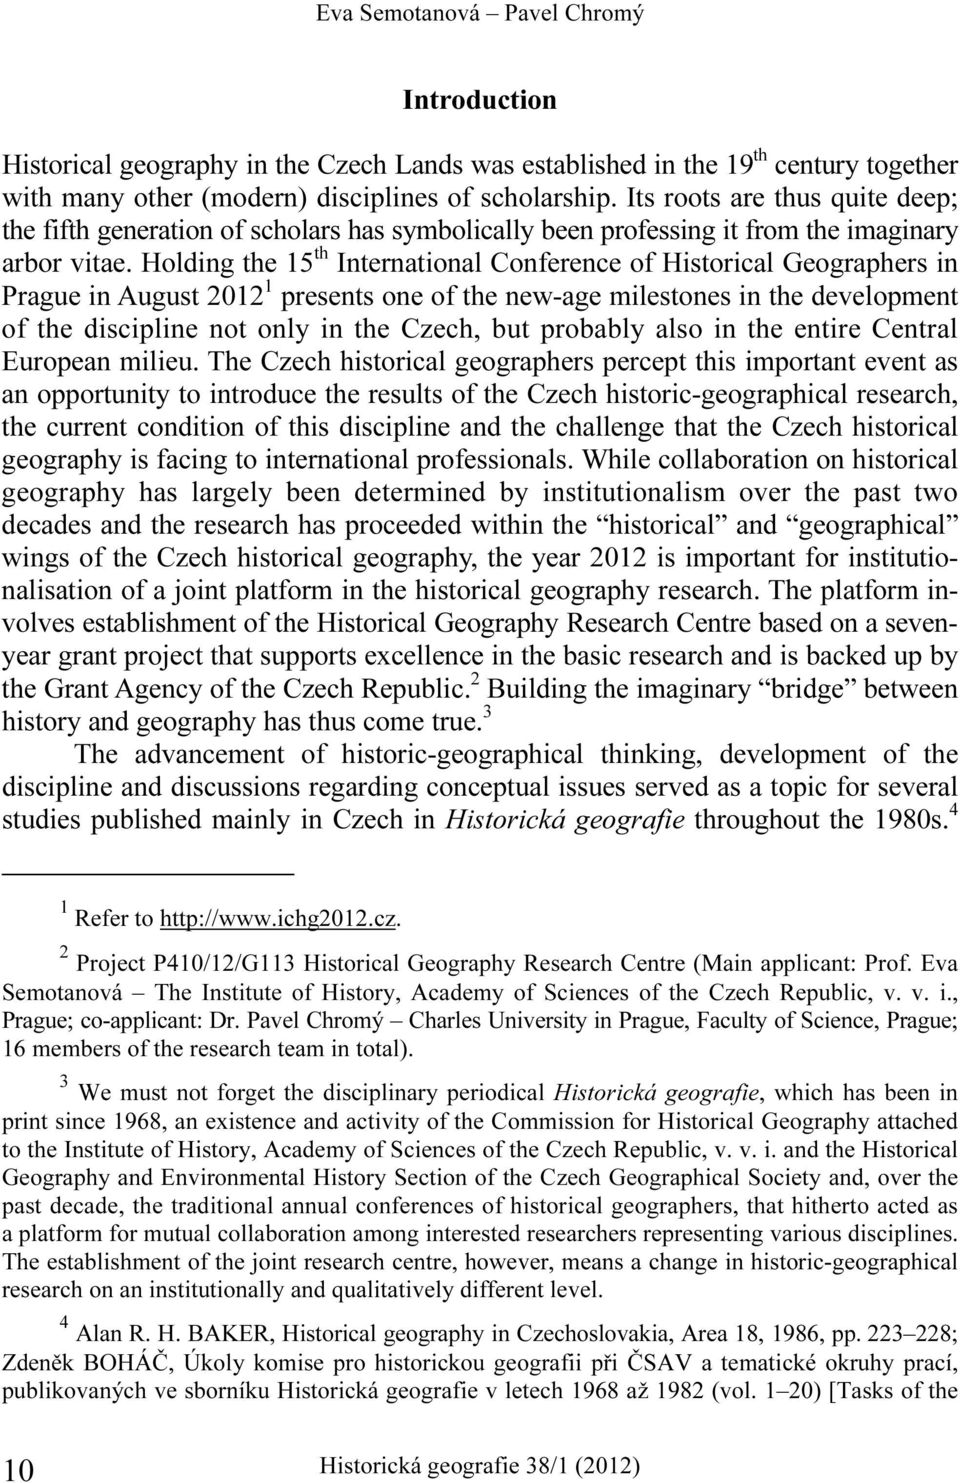 Holding the 15 th International Conference of Historical Geographers in Prague in August 2012 1 presents one of the new-age milestones in the development of the discipline not only in the Czech, but